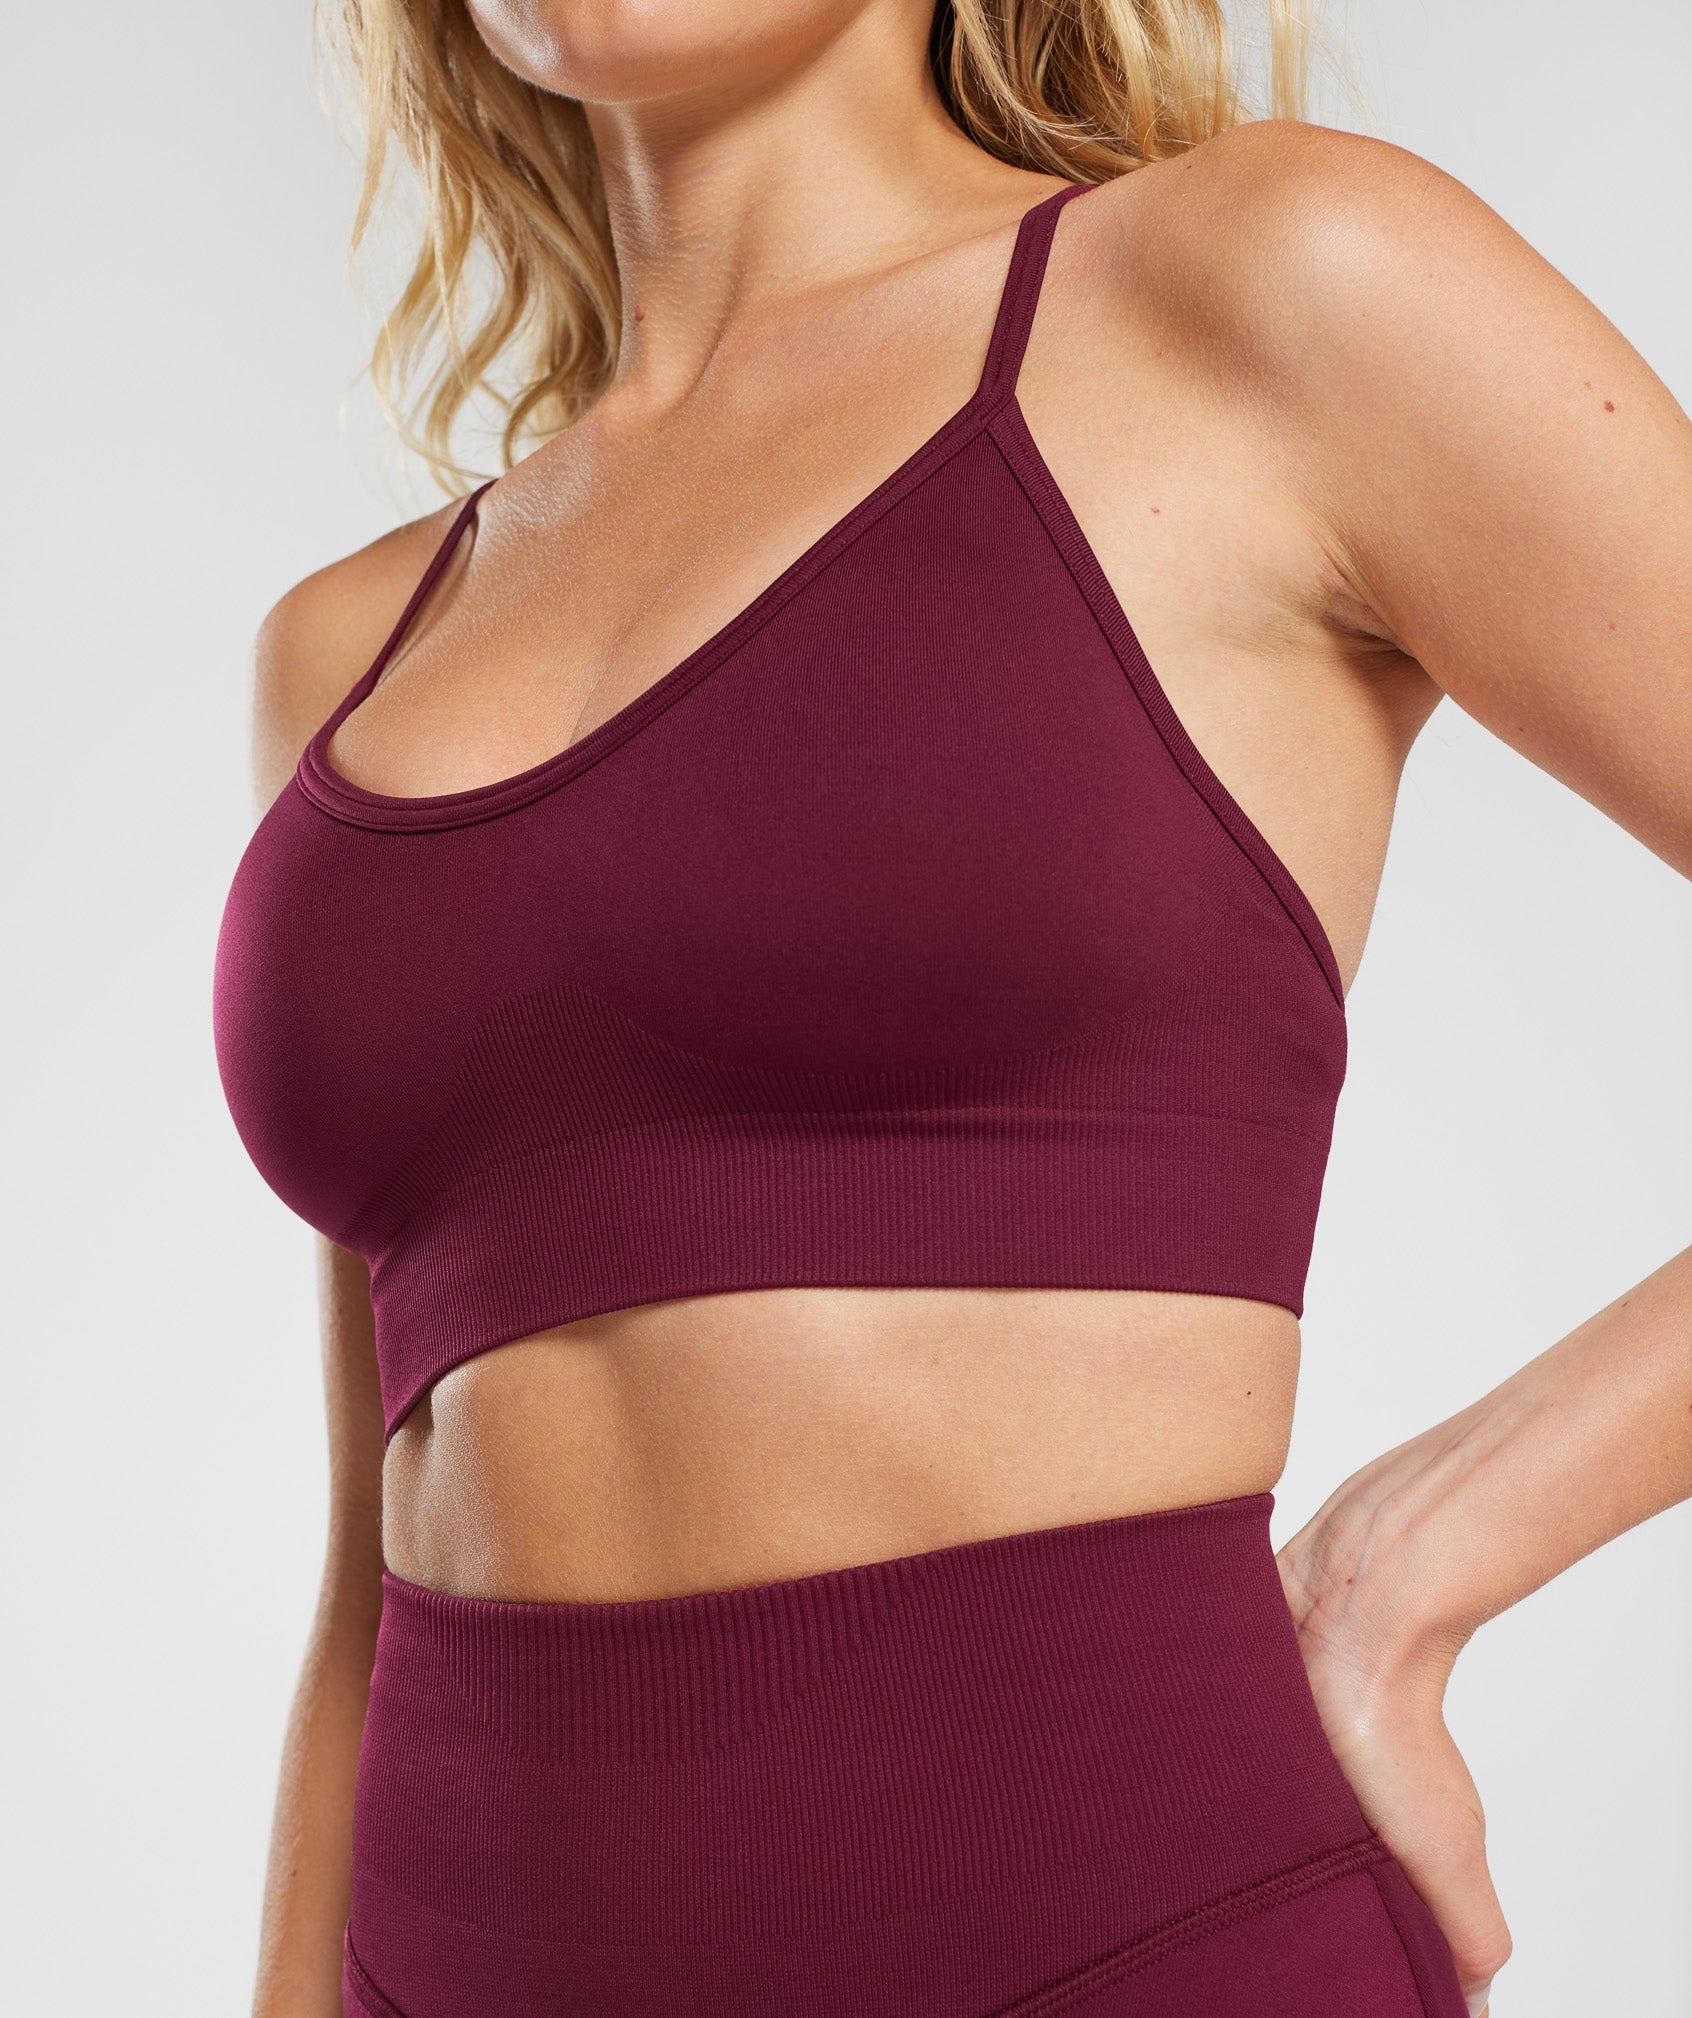 GYMSHARK SET OF 2 XS Womens Athletic Gym Sports Bras Maroon Pink Purple  $29.99 - PicClick